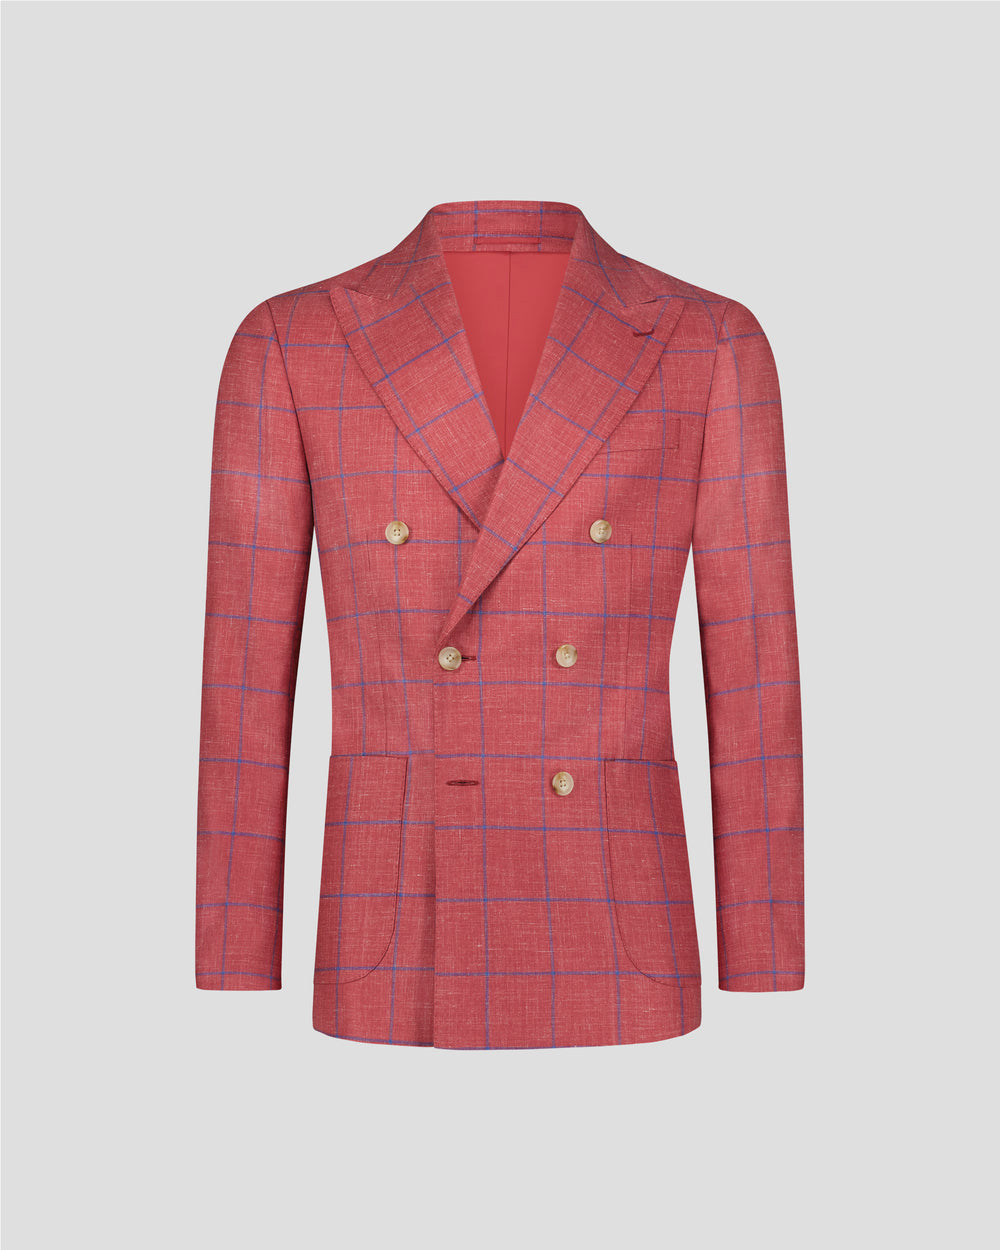 P.A.R.O.S.H. double-breasted blazer - Red